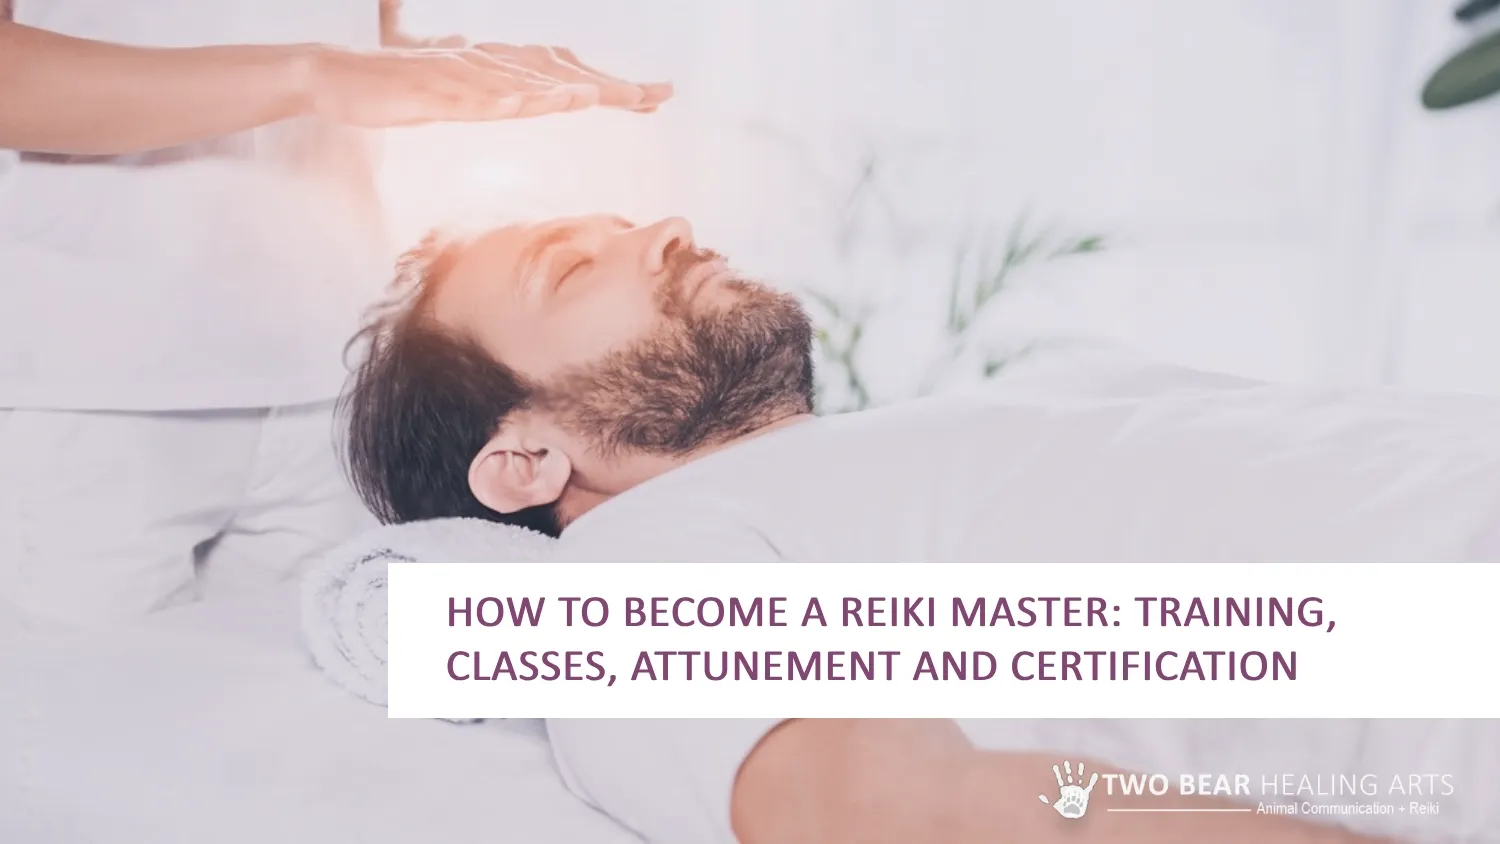 Embark on your Reiki Master journey! Image depicts a man receiving Reiki treatment in a relaxed, lying-down position. Learn the steps to become a Reiki Master and deepen your energy healing practice.